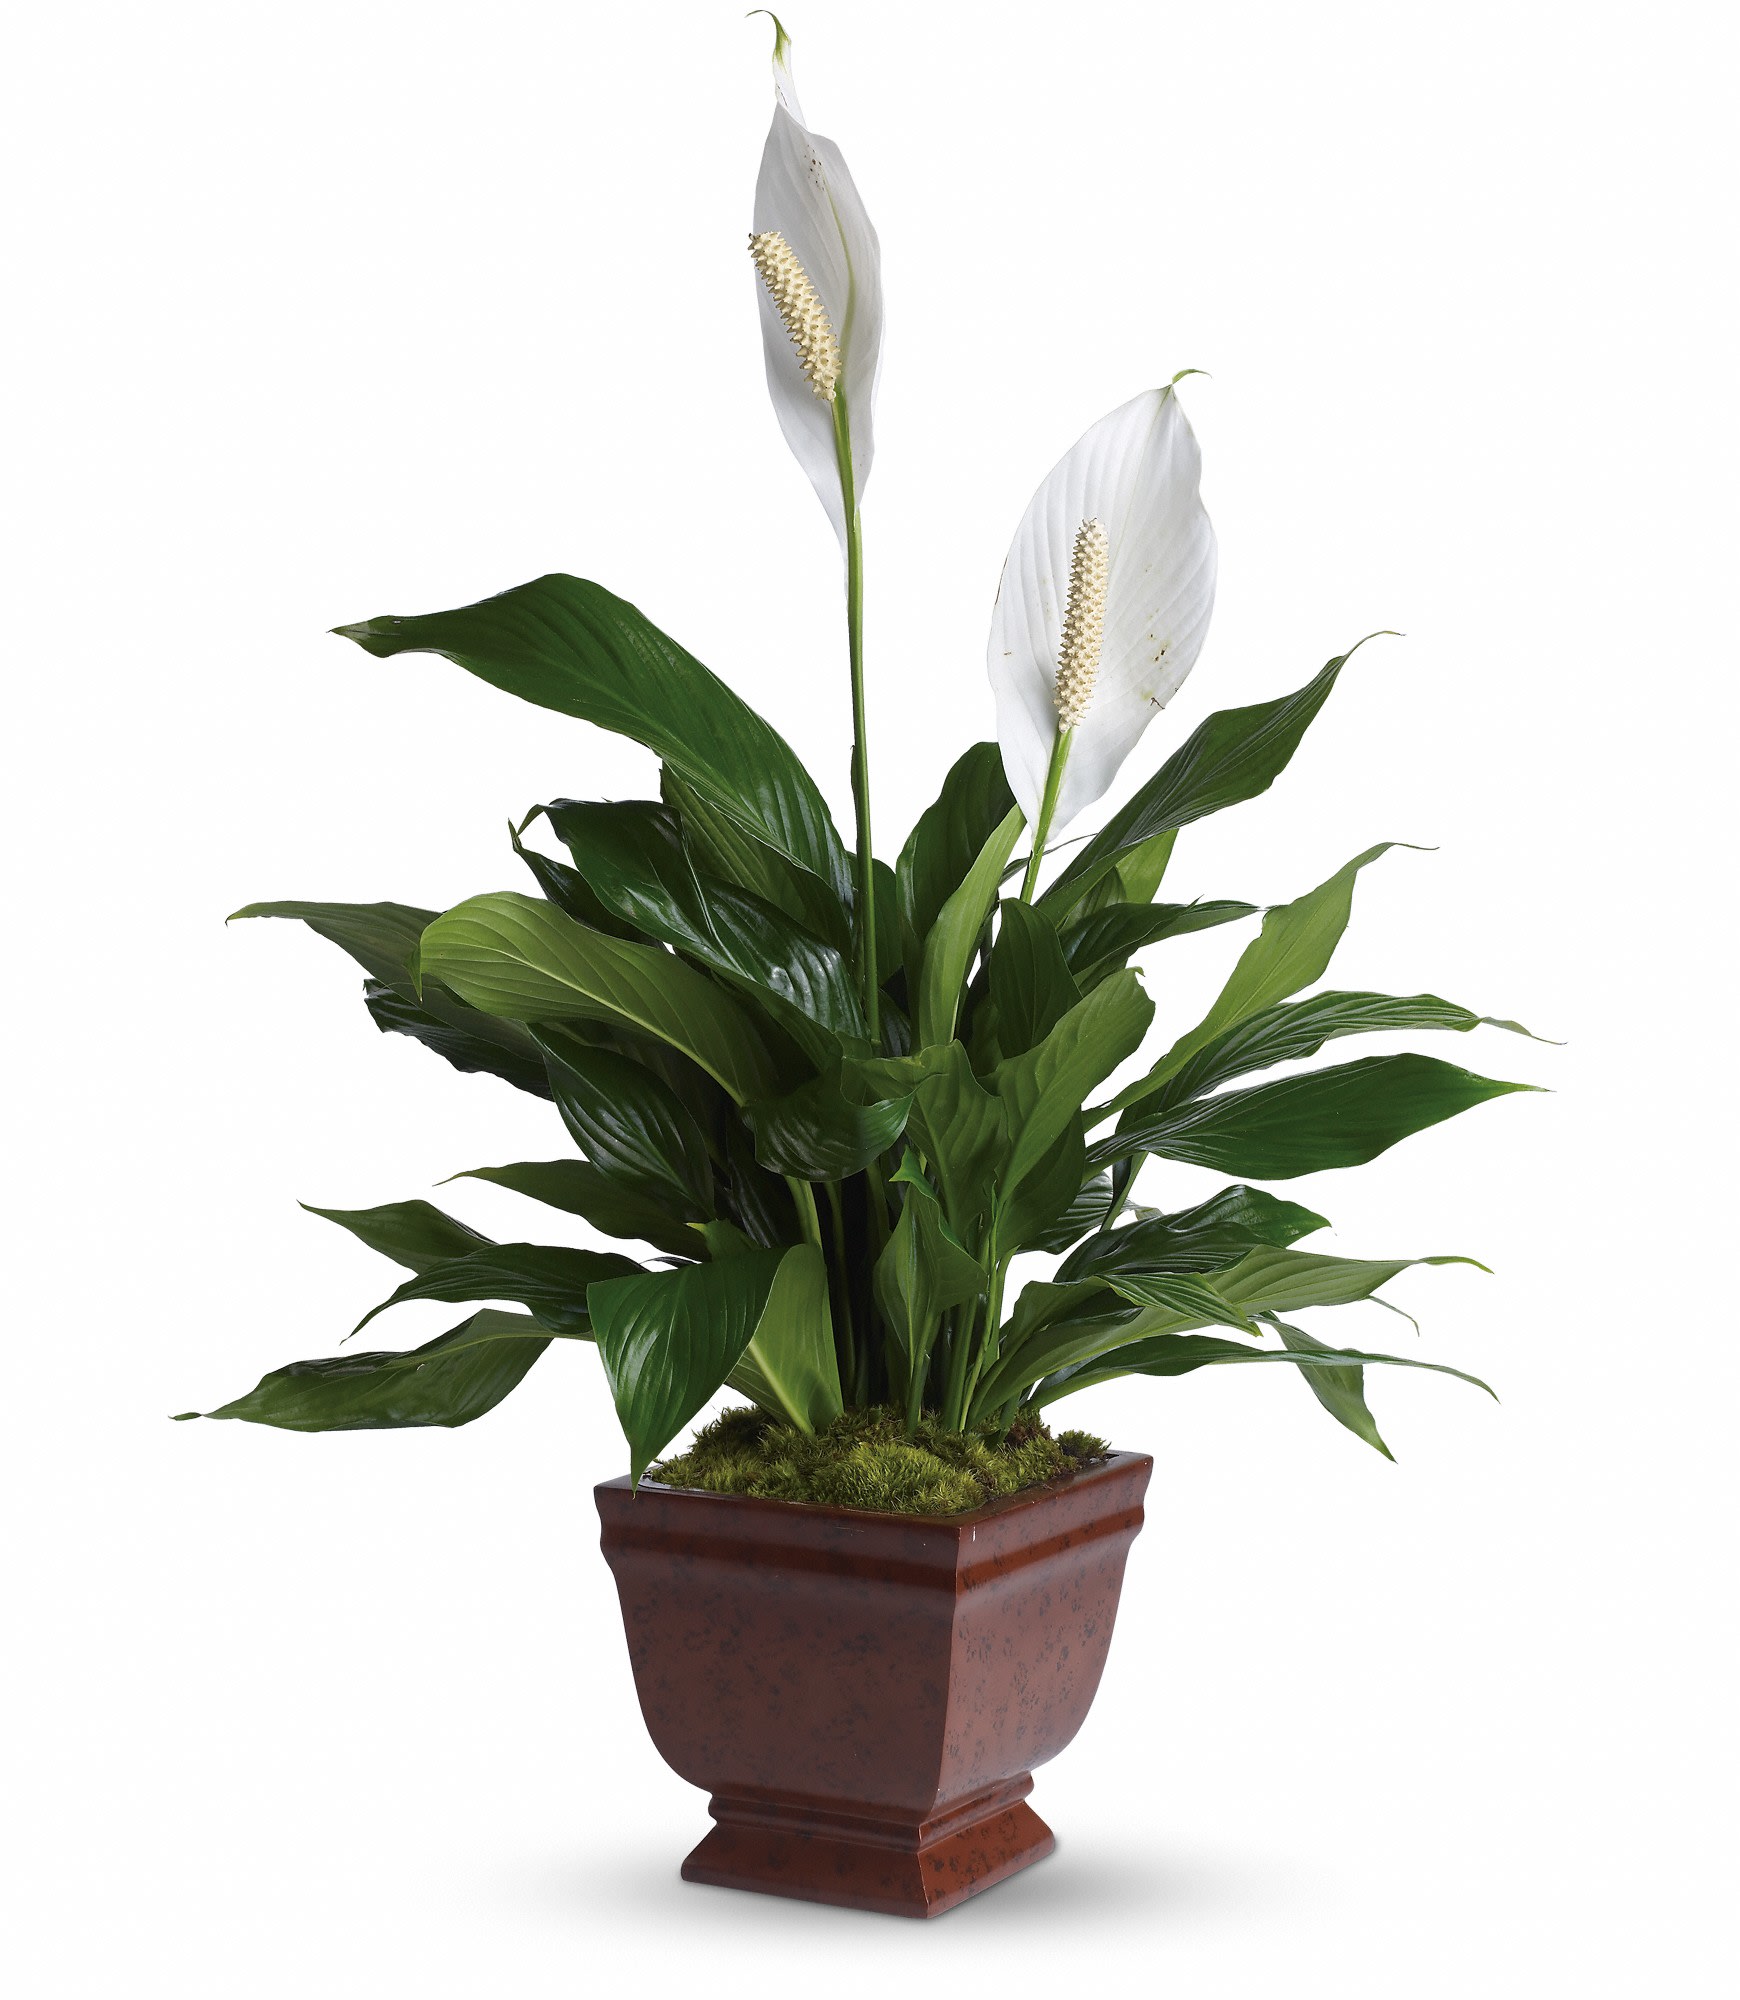 Lovely One Spathiphyllum Plant - The graceful spathiphyllum plant with its snowy white flowers is a familiar and reassuring sight in any setting. A gift of beauty that lasts. T272-1A